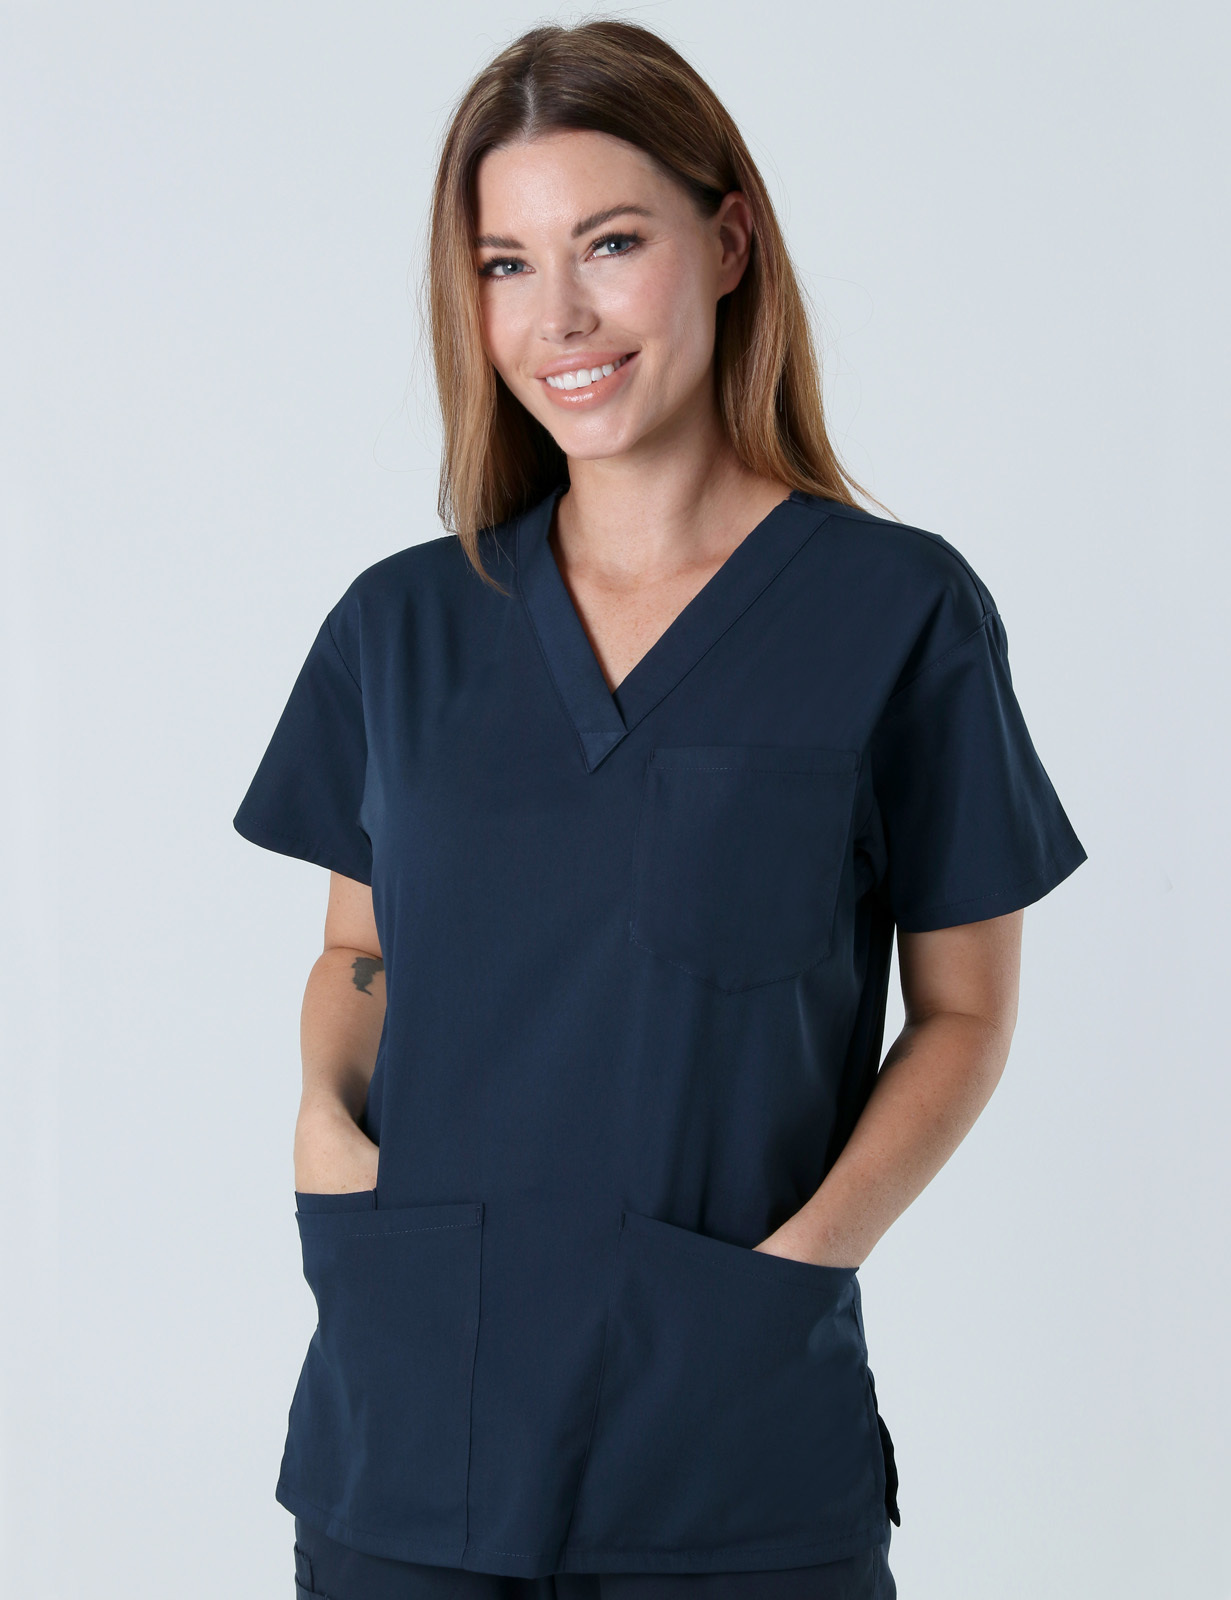 Toowoomba Hospital - Critical Care RN (4 Pocket Scrub Top and Cargo Pants in Navy incl Logos)